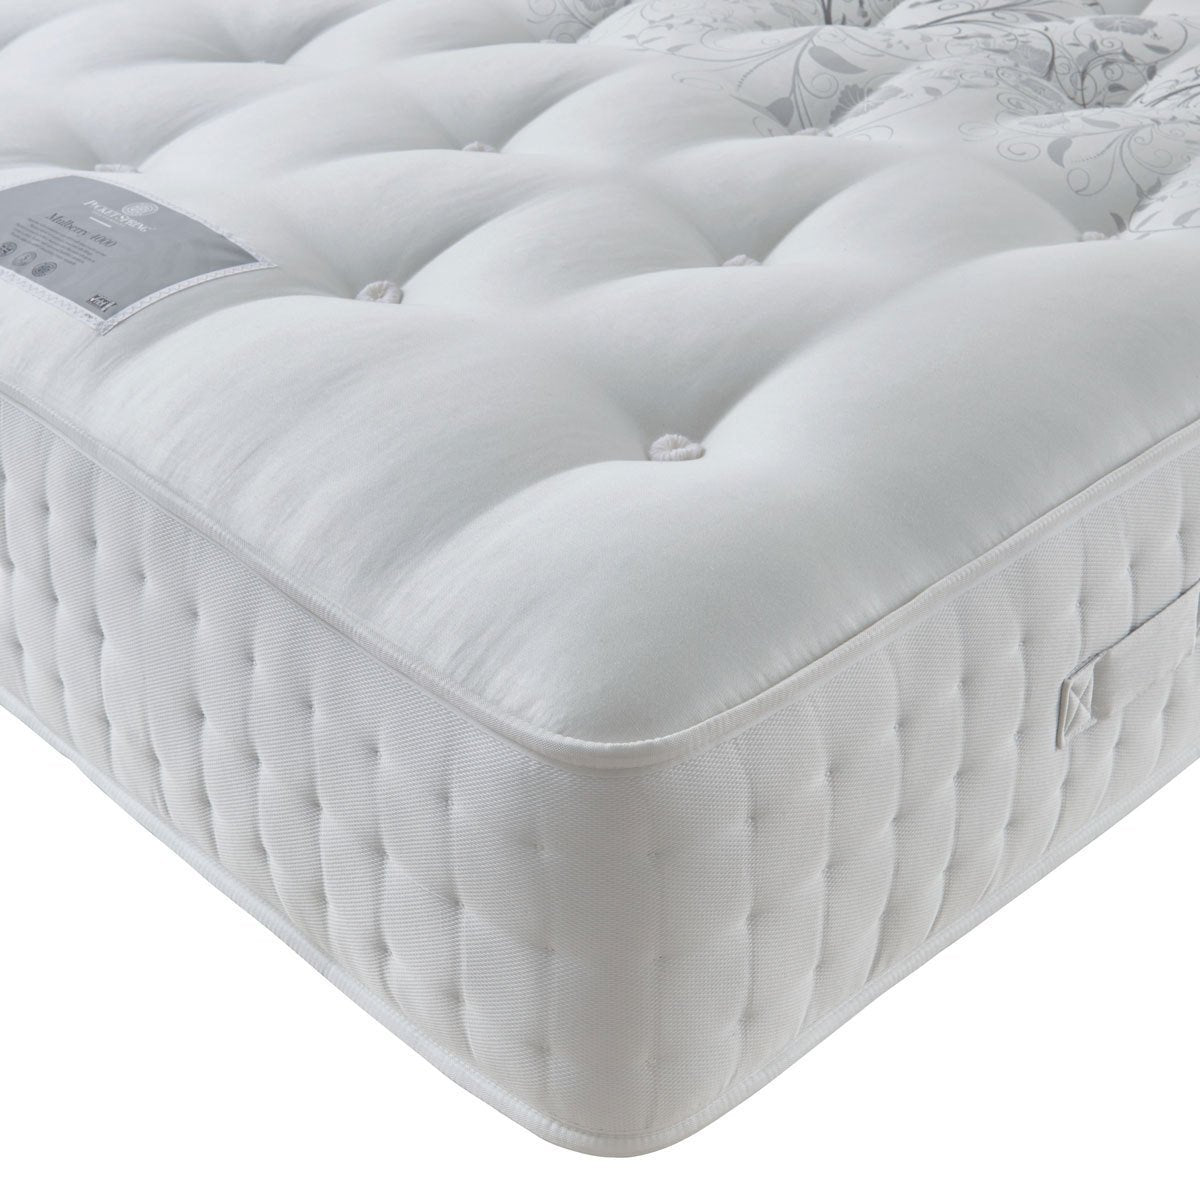 Pocket Spring Bed Company Mulberry Mattress & Grey Divan with 4 Drawers in 3 Sizes - Signature Retail Stores